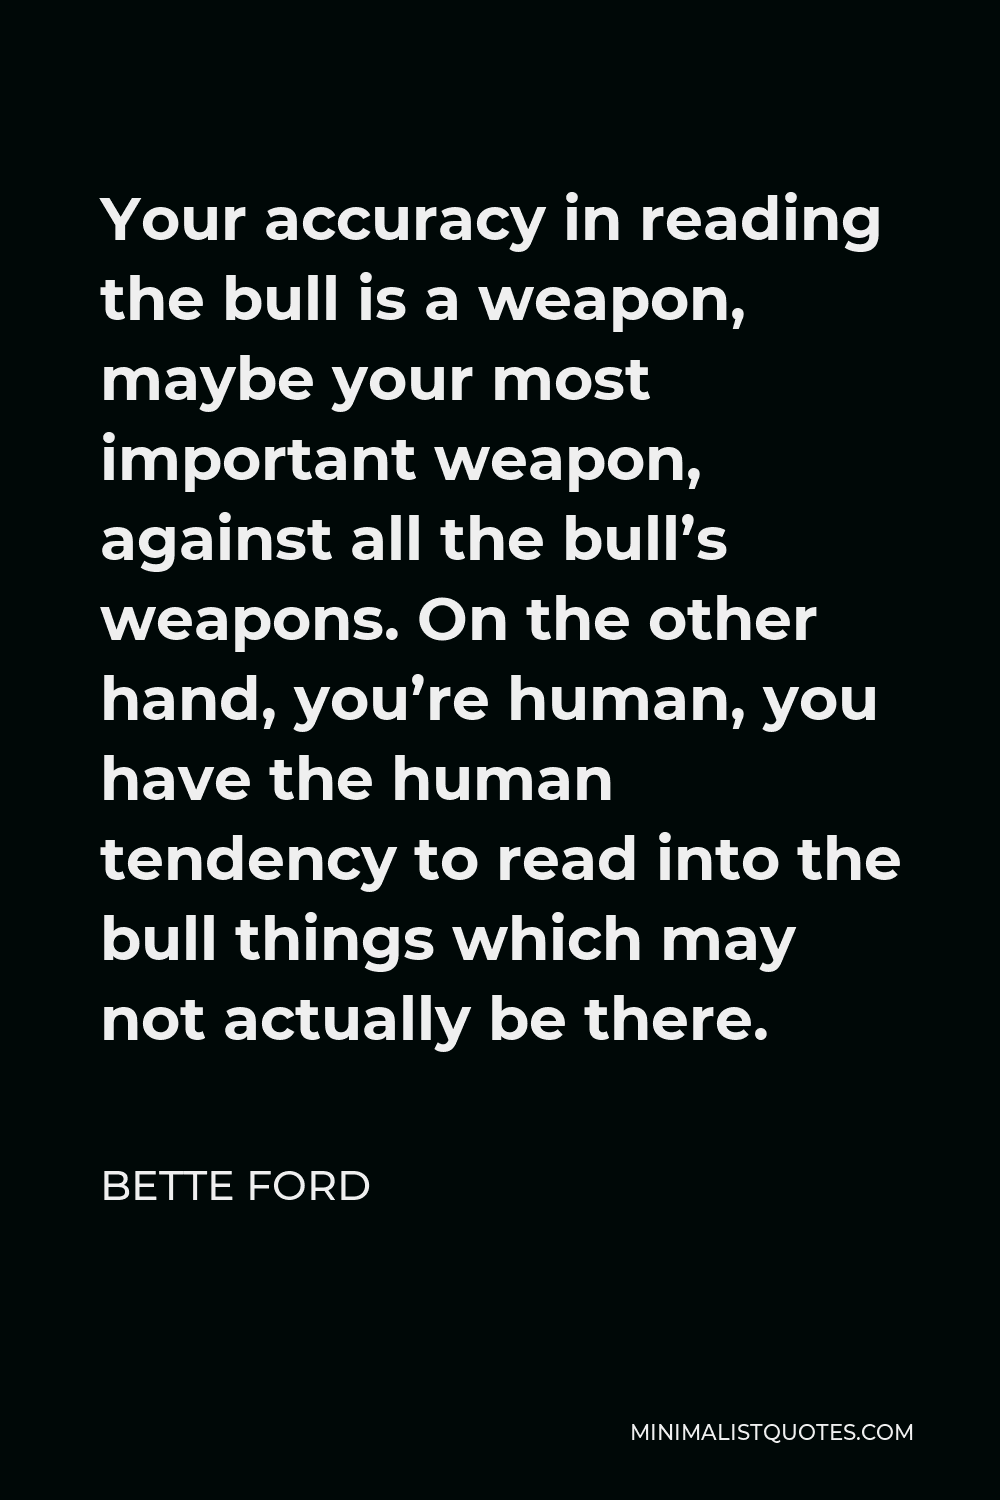 Bette Ford Quote - Your accuracy in reading the bull is a weapon, maybe your most important weapon, against all the bull’s weapons. On the other hand, you’re human, you have the human tendency to read into the bull things which may not actually be there.